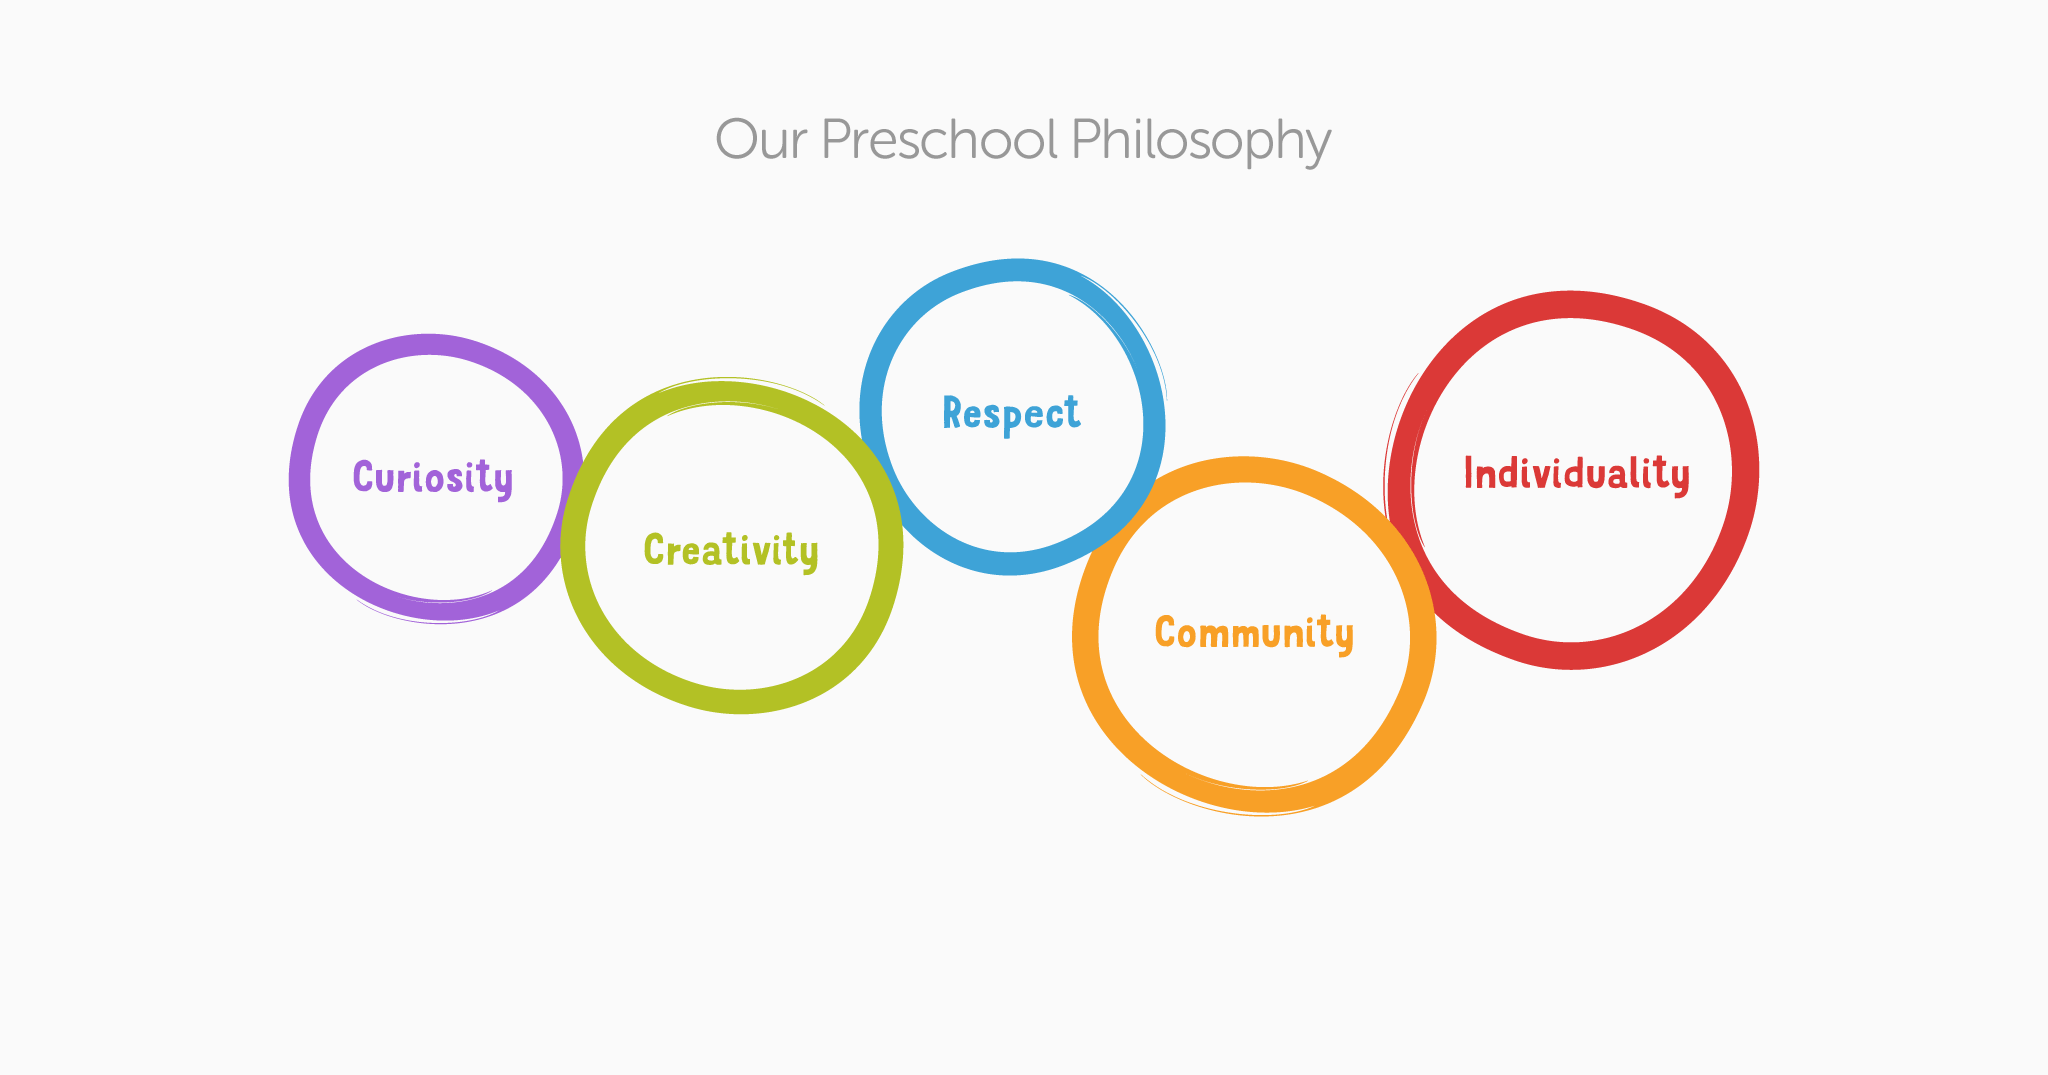 The First School philosophy